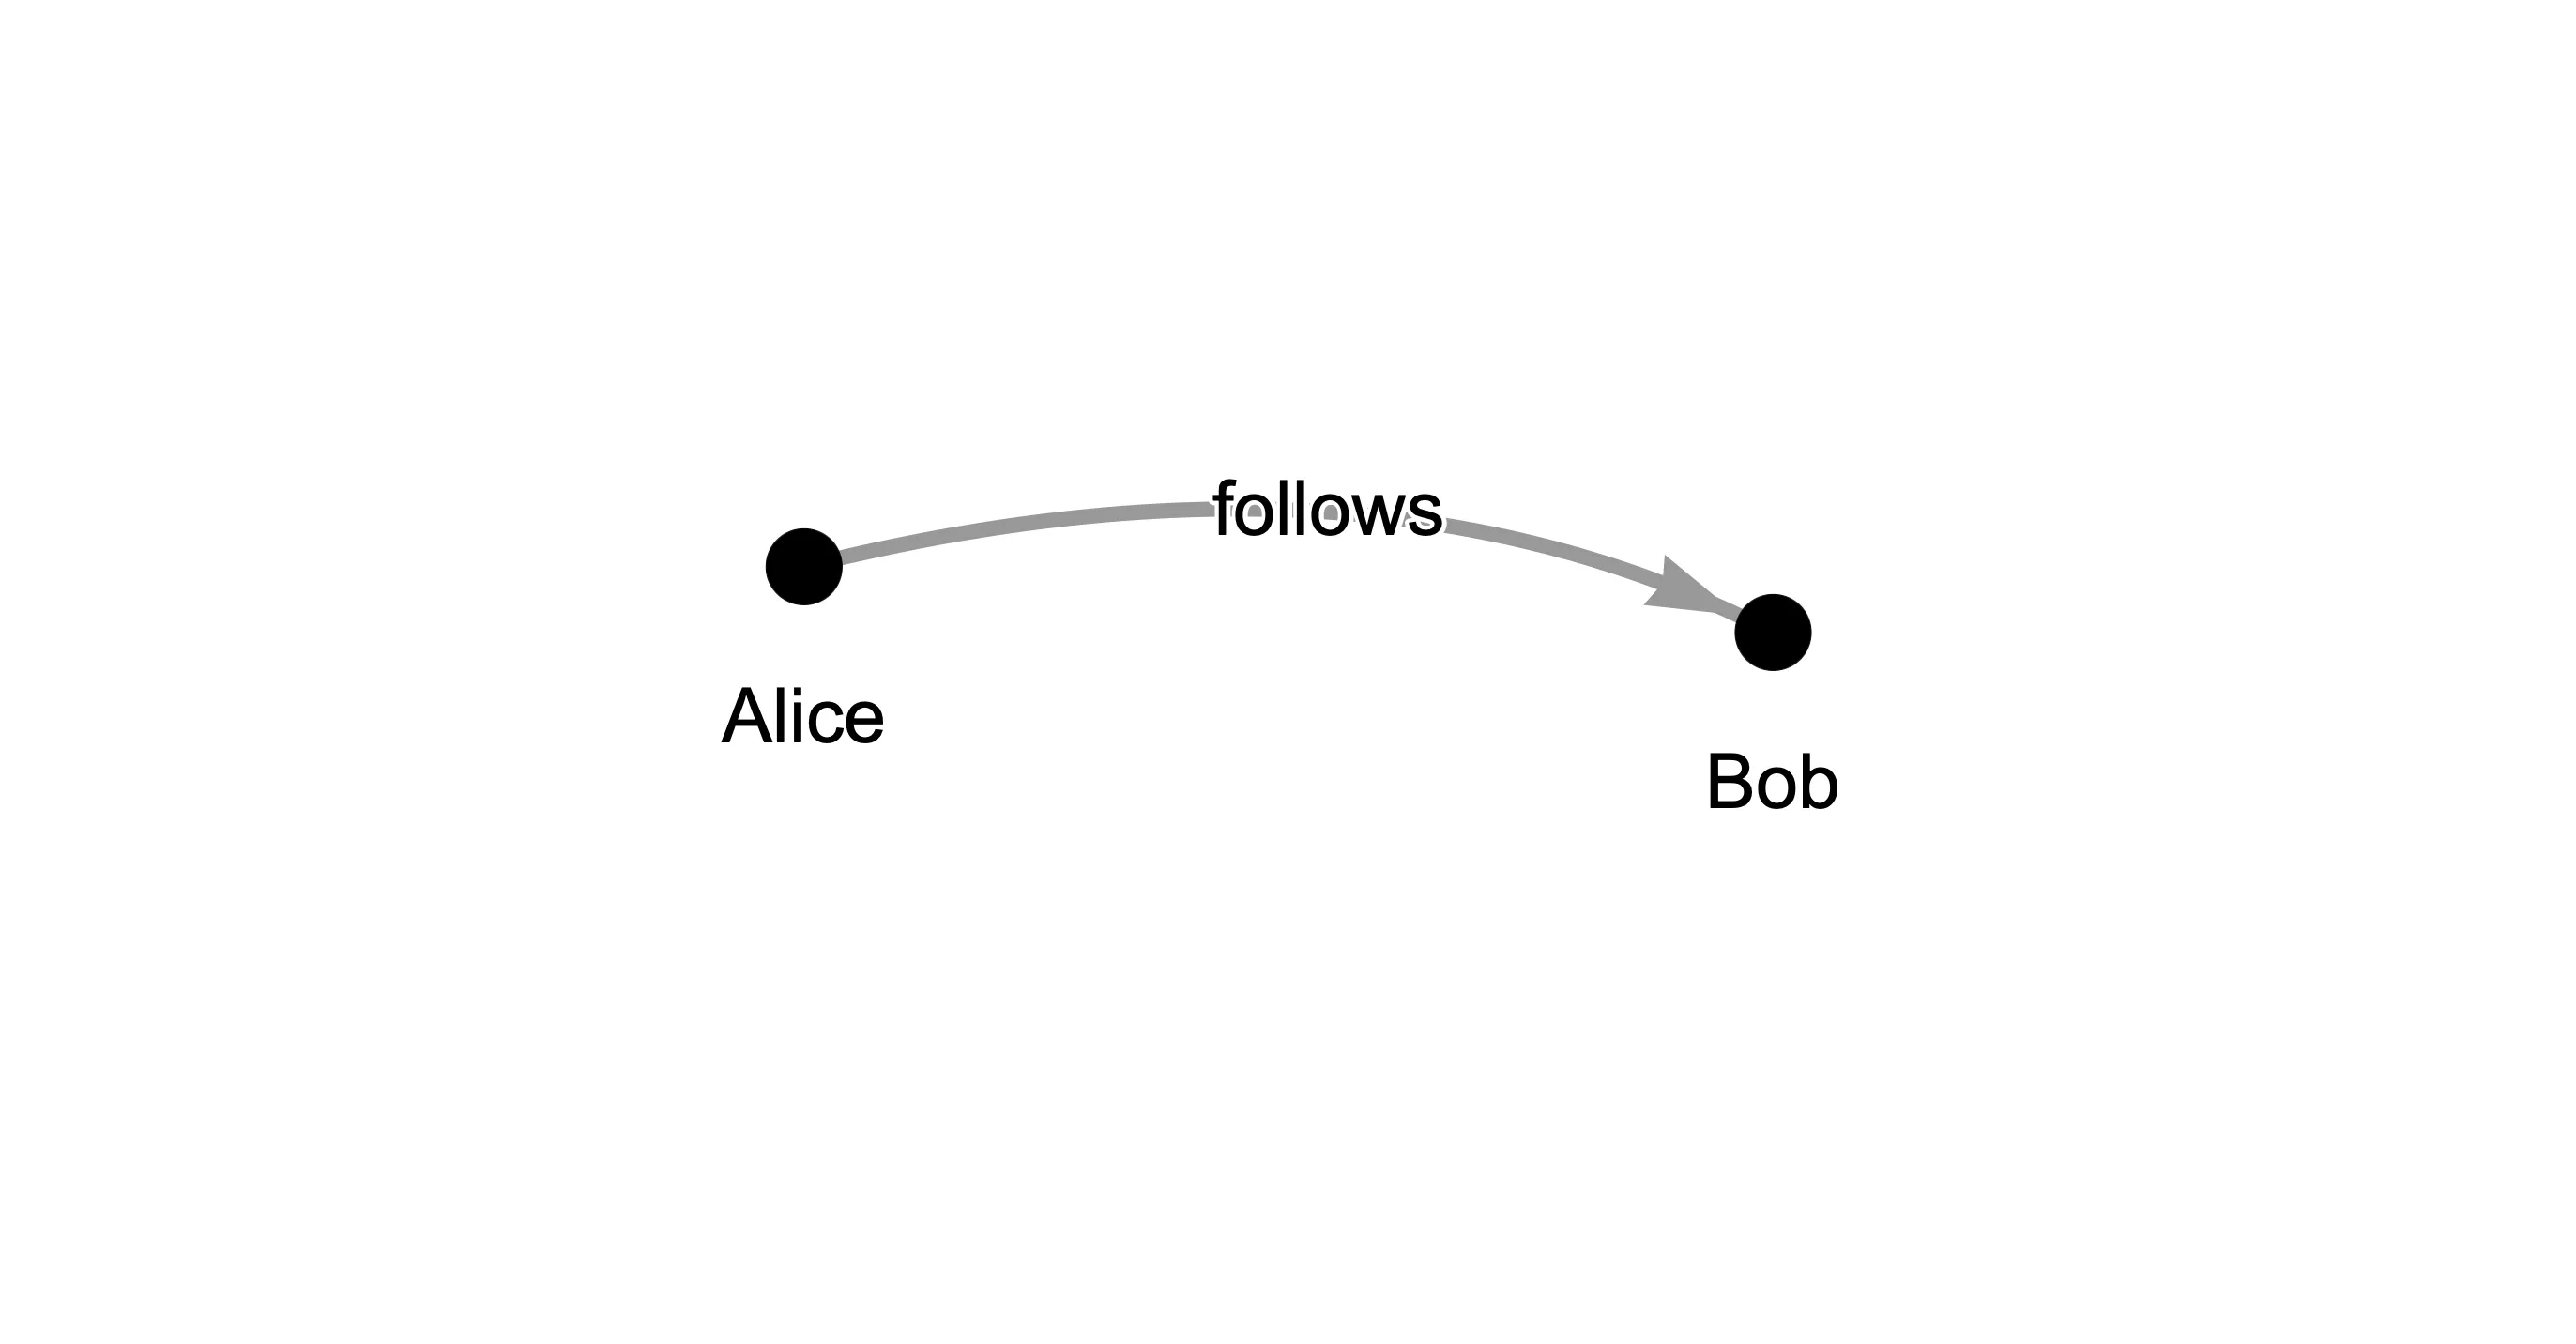 A graph with two nodes labeled Alice and Bob and an arrow pointing from Alice to Bob.